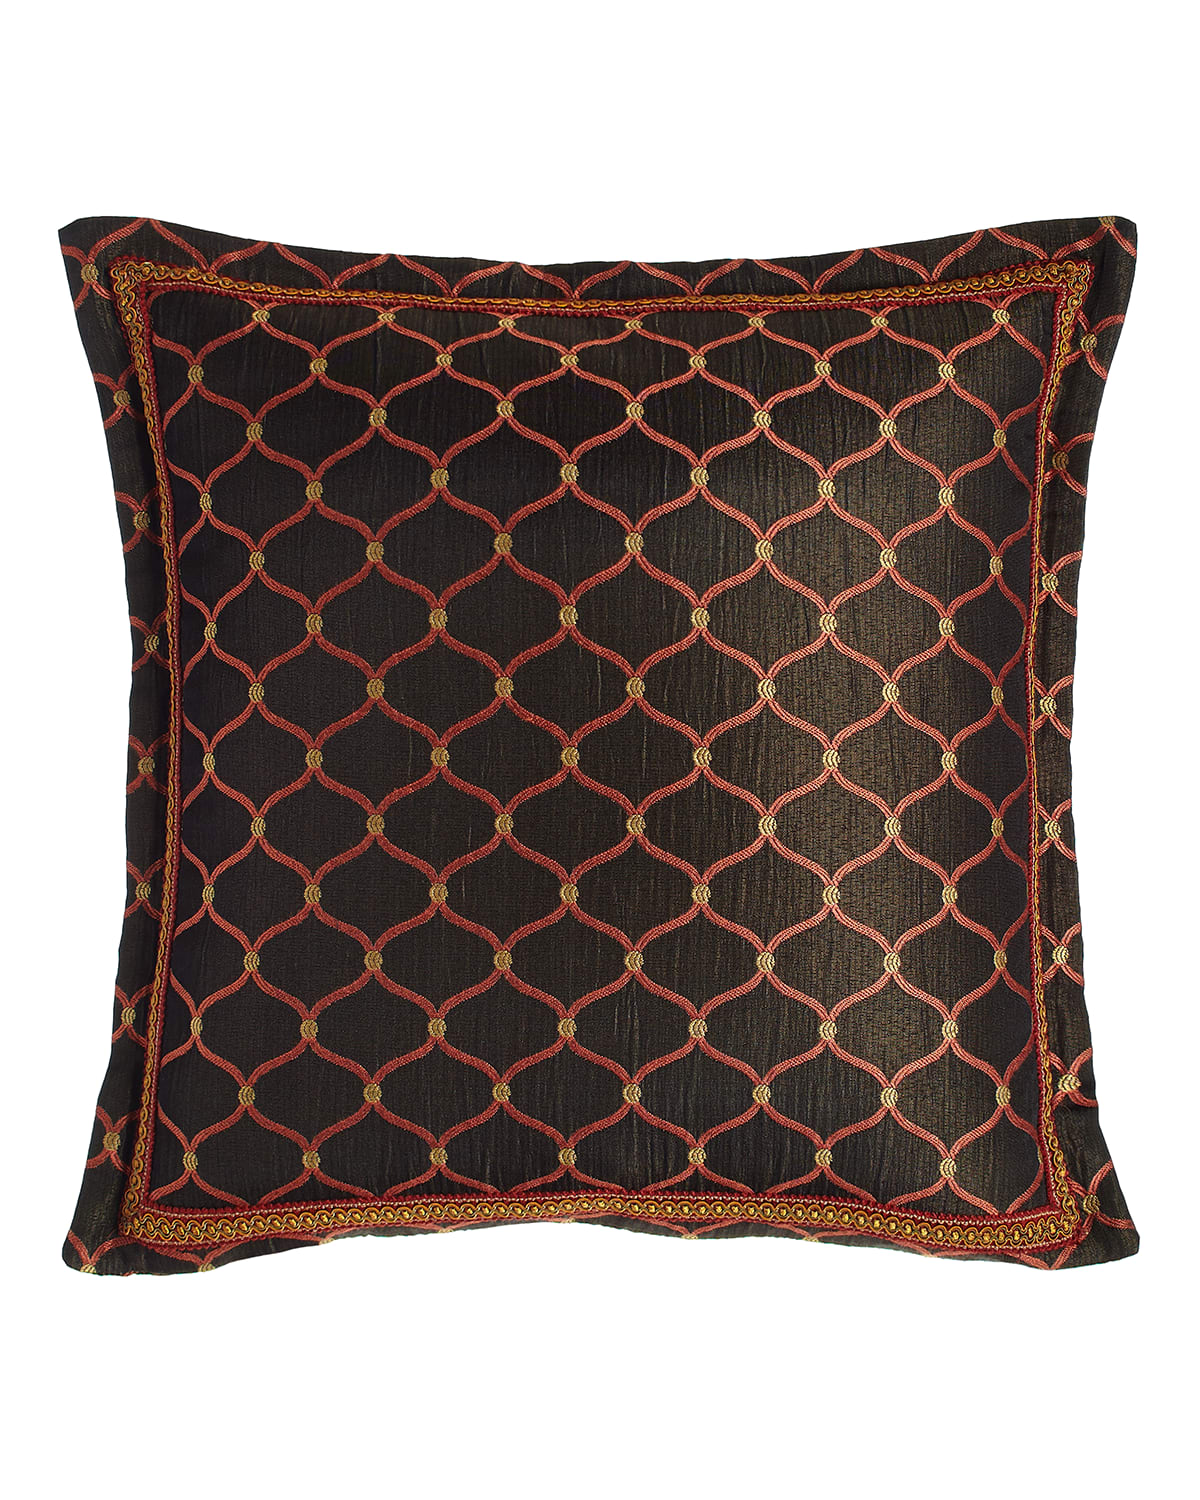 Image Austin Horn Collection Royale Flanged Ogee Pillow, 18"Sq.